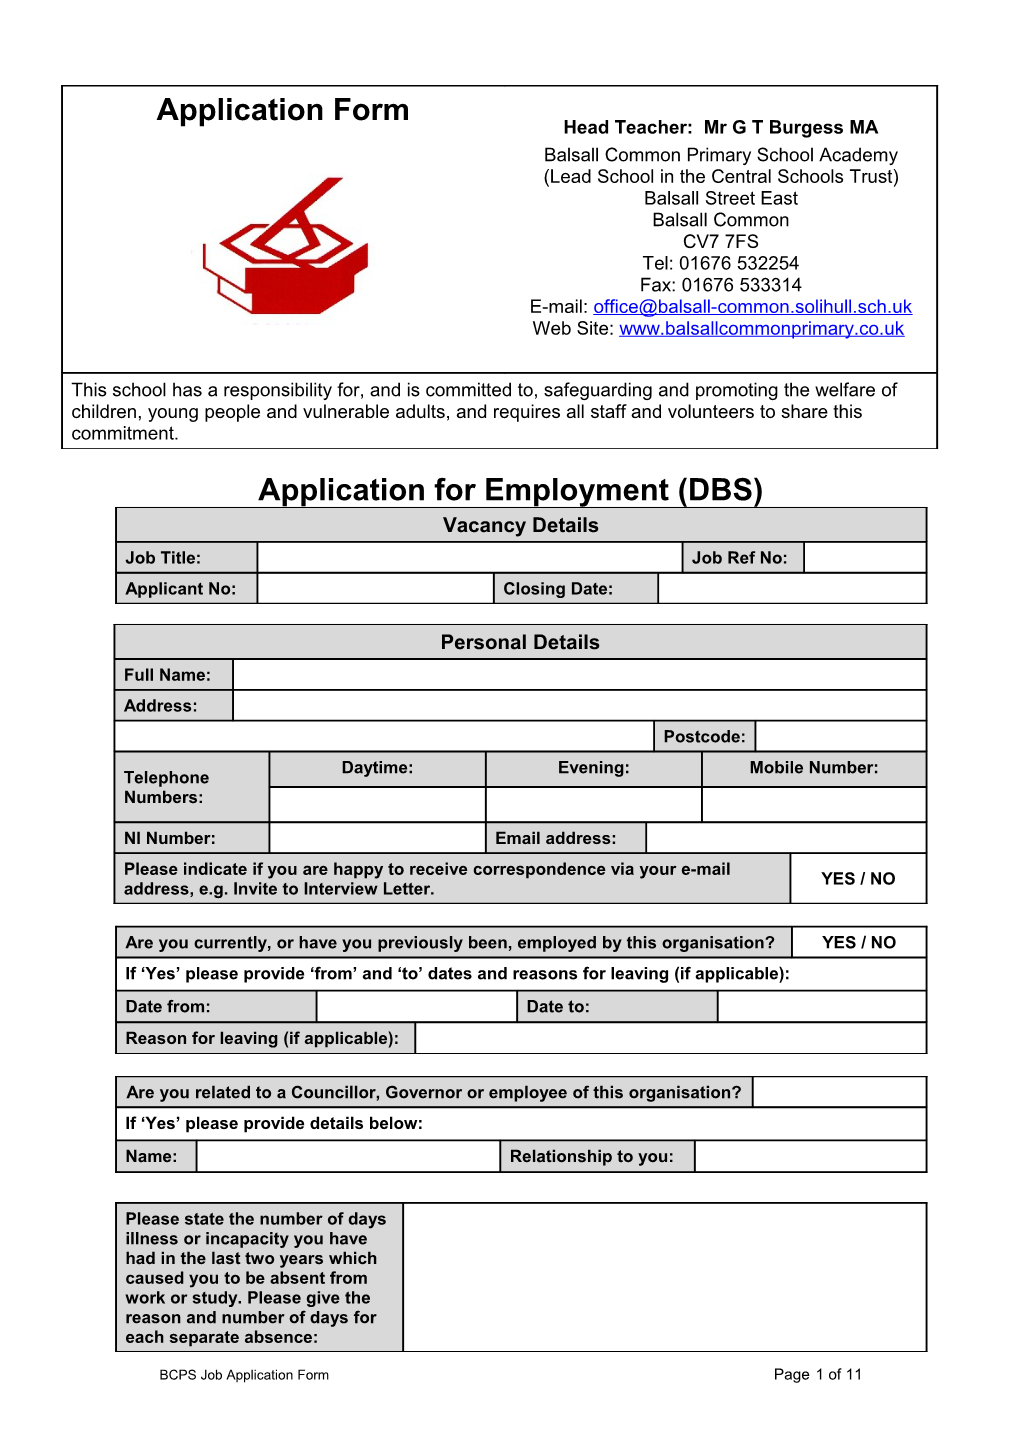 Application for Employment - Disclosure Required s1